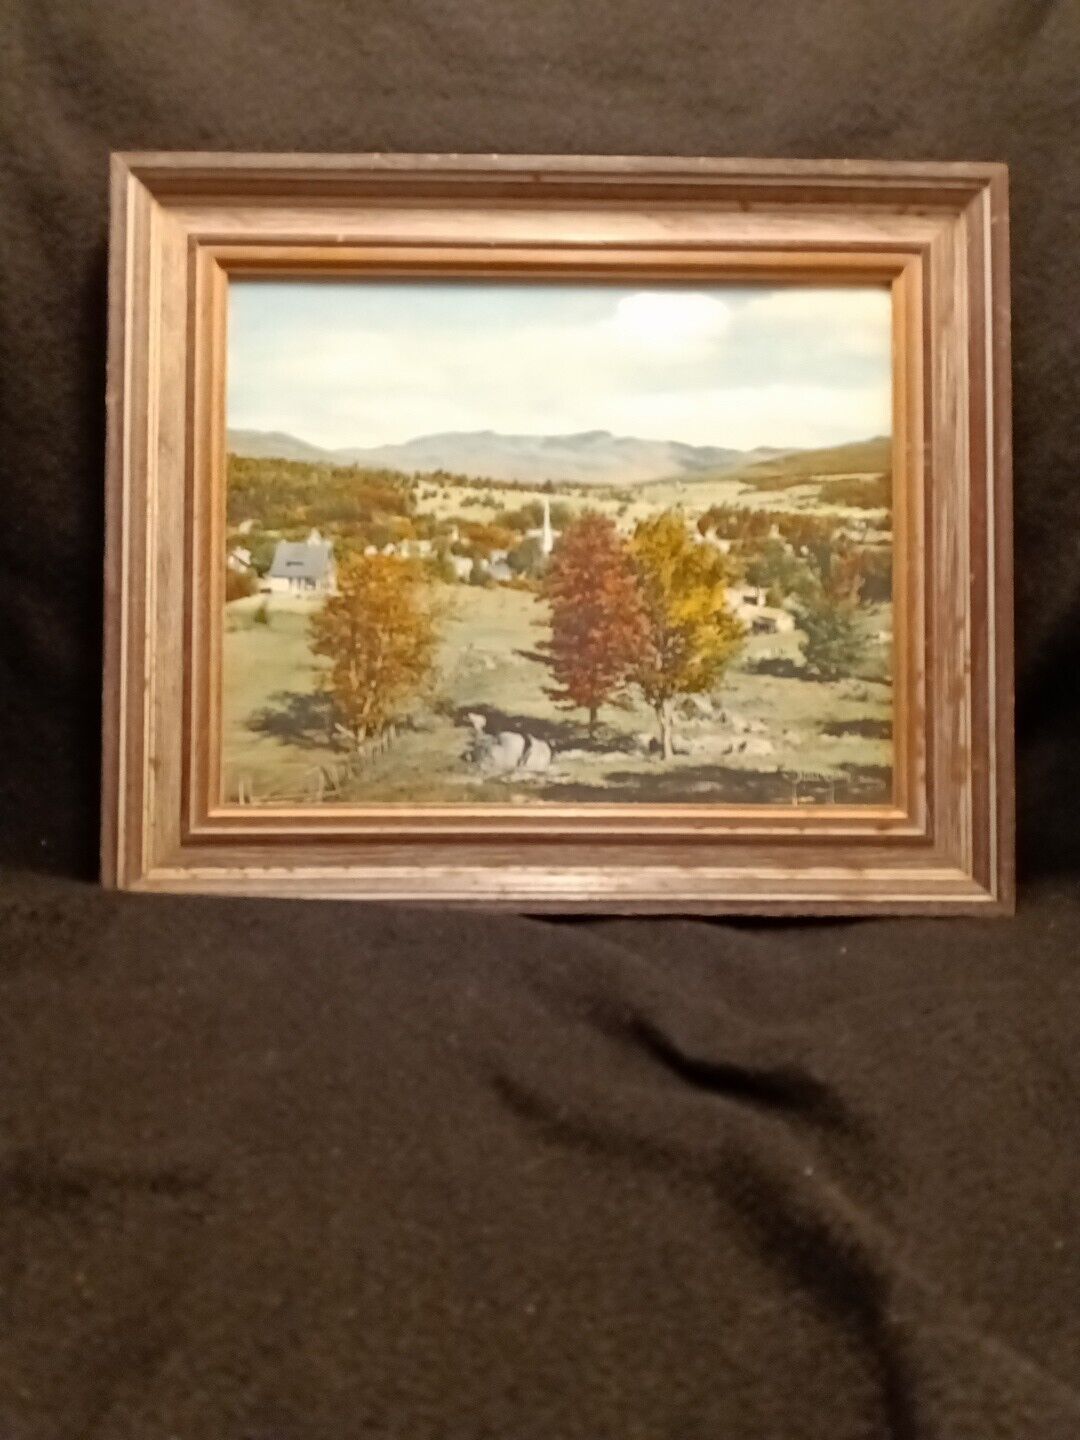 Charles Sawyer Hand Colored Photo 8x10 framed 12 1/2x10 1/2 Mount Mansfield 